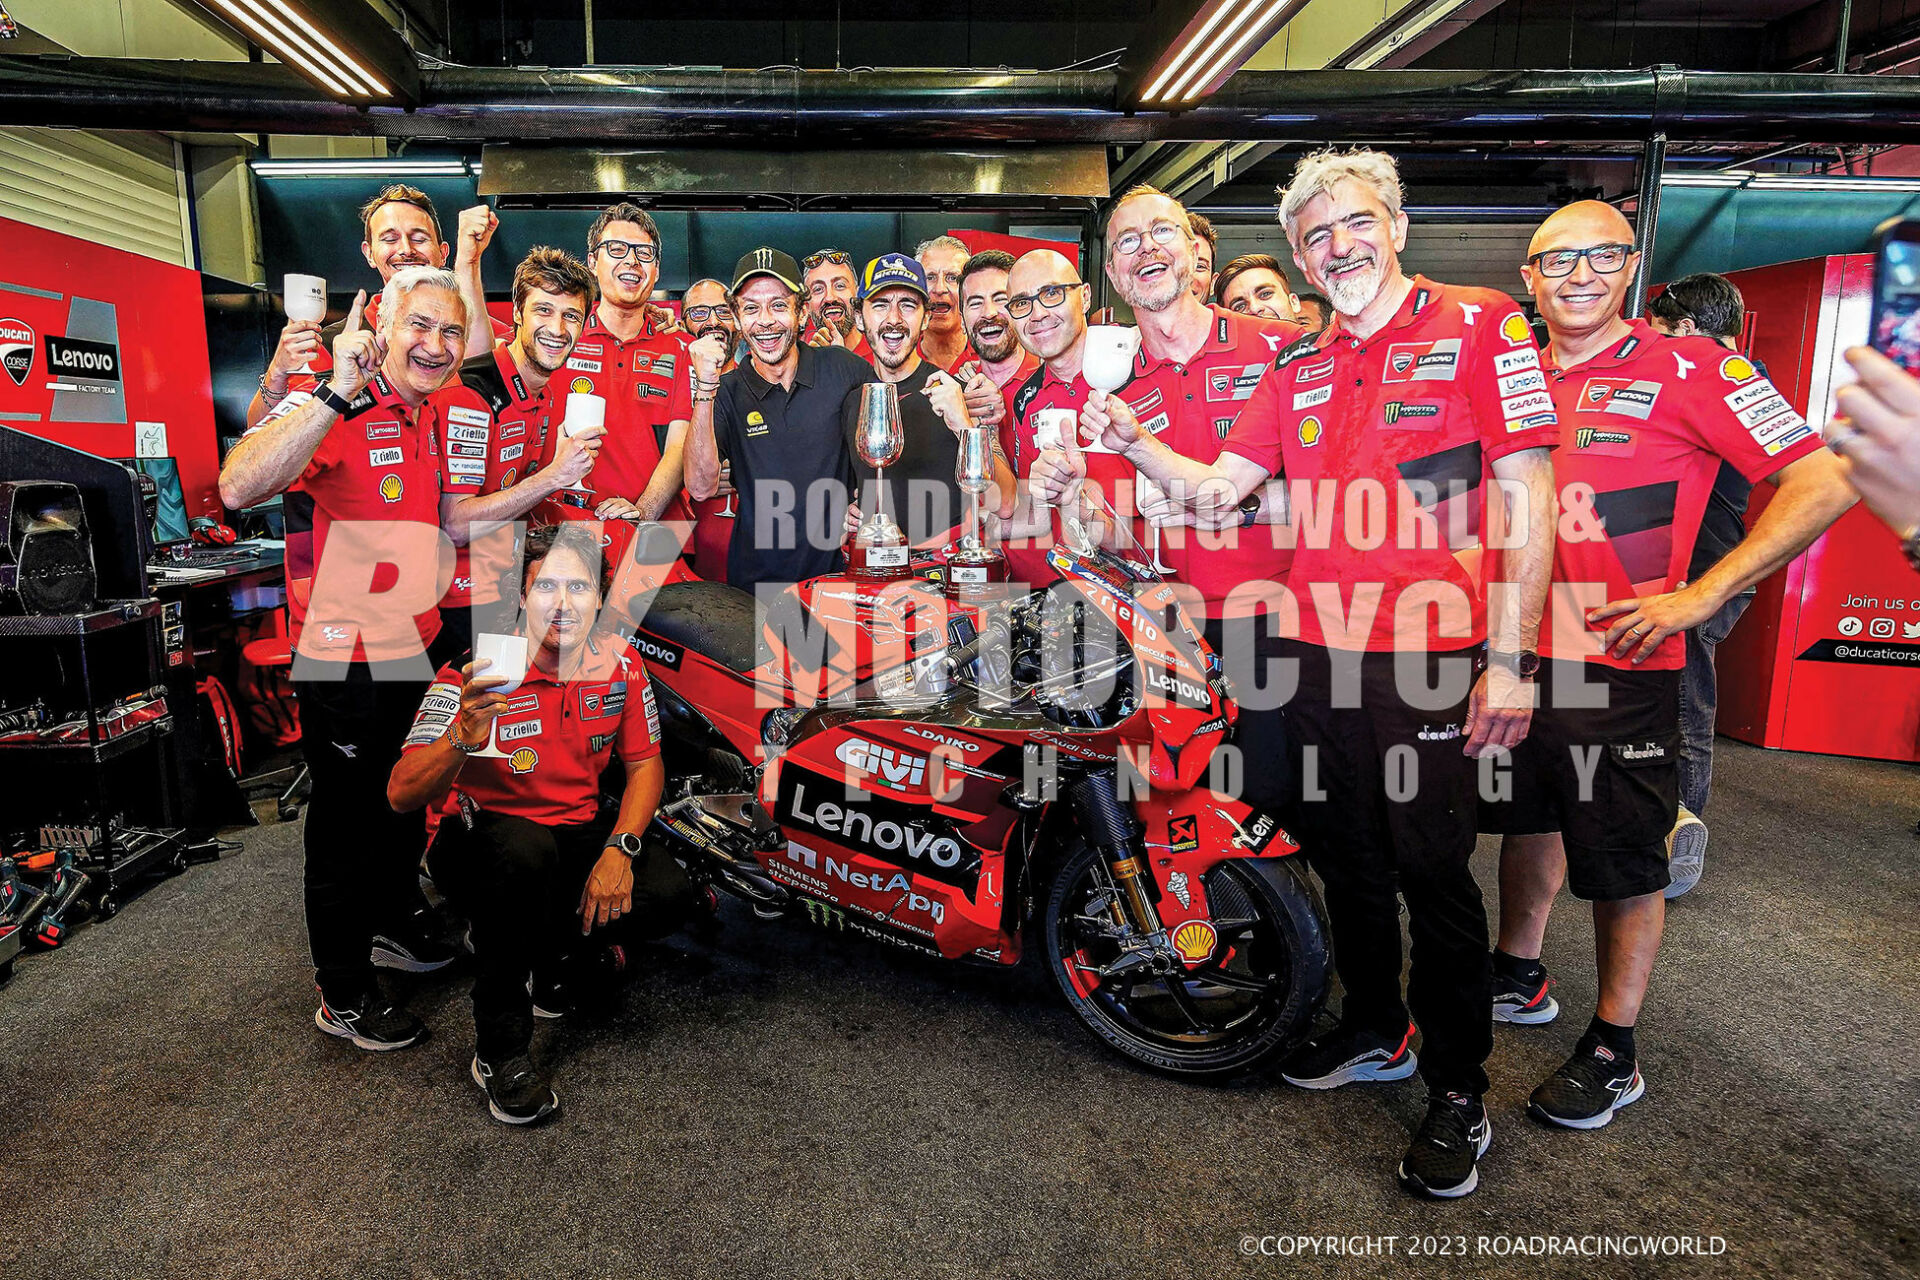 Francesco Bagnaia and mentor Valentino Rossi (in black) celebrate a Jerez win with the Ducati crew. Team Manager Davide Tardozzi is at far left and Ducati Corsa General Manager Gigi Dall'Igna is second from right.